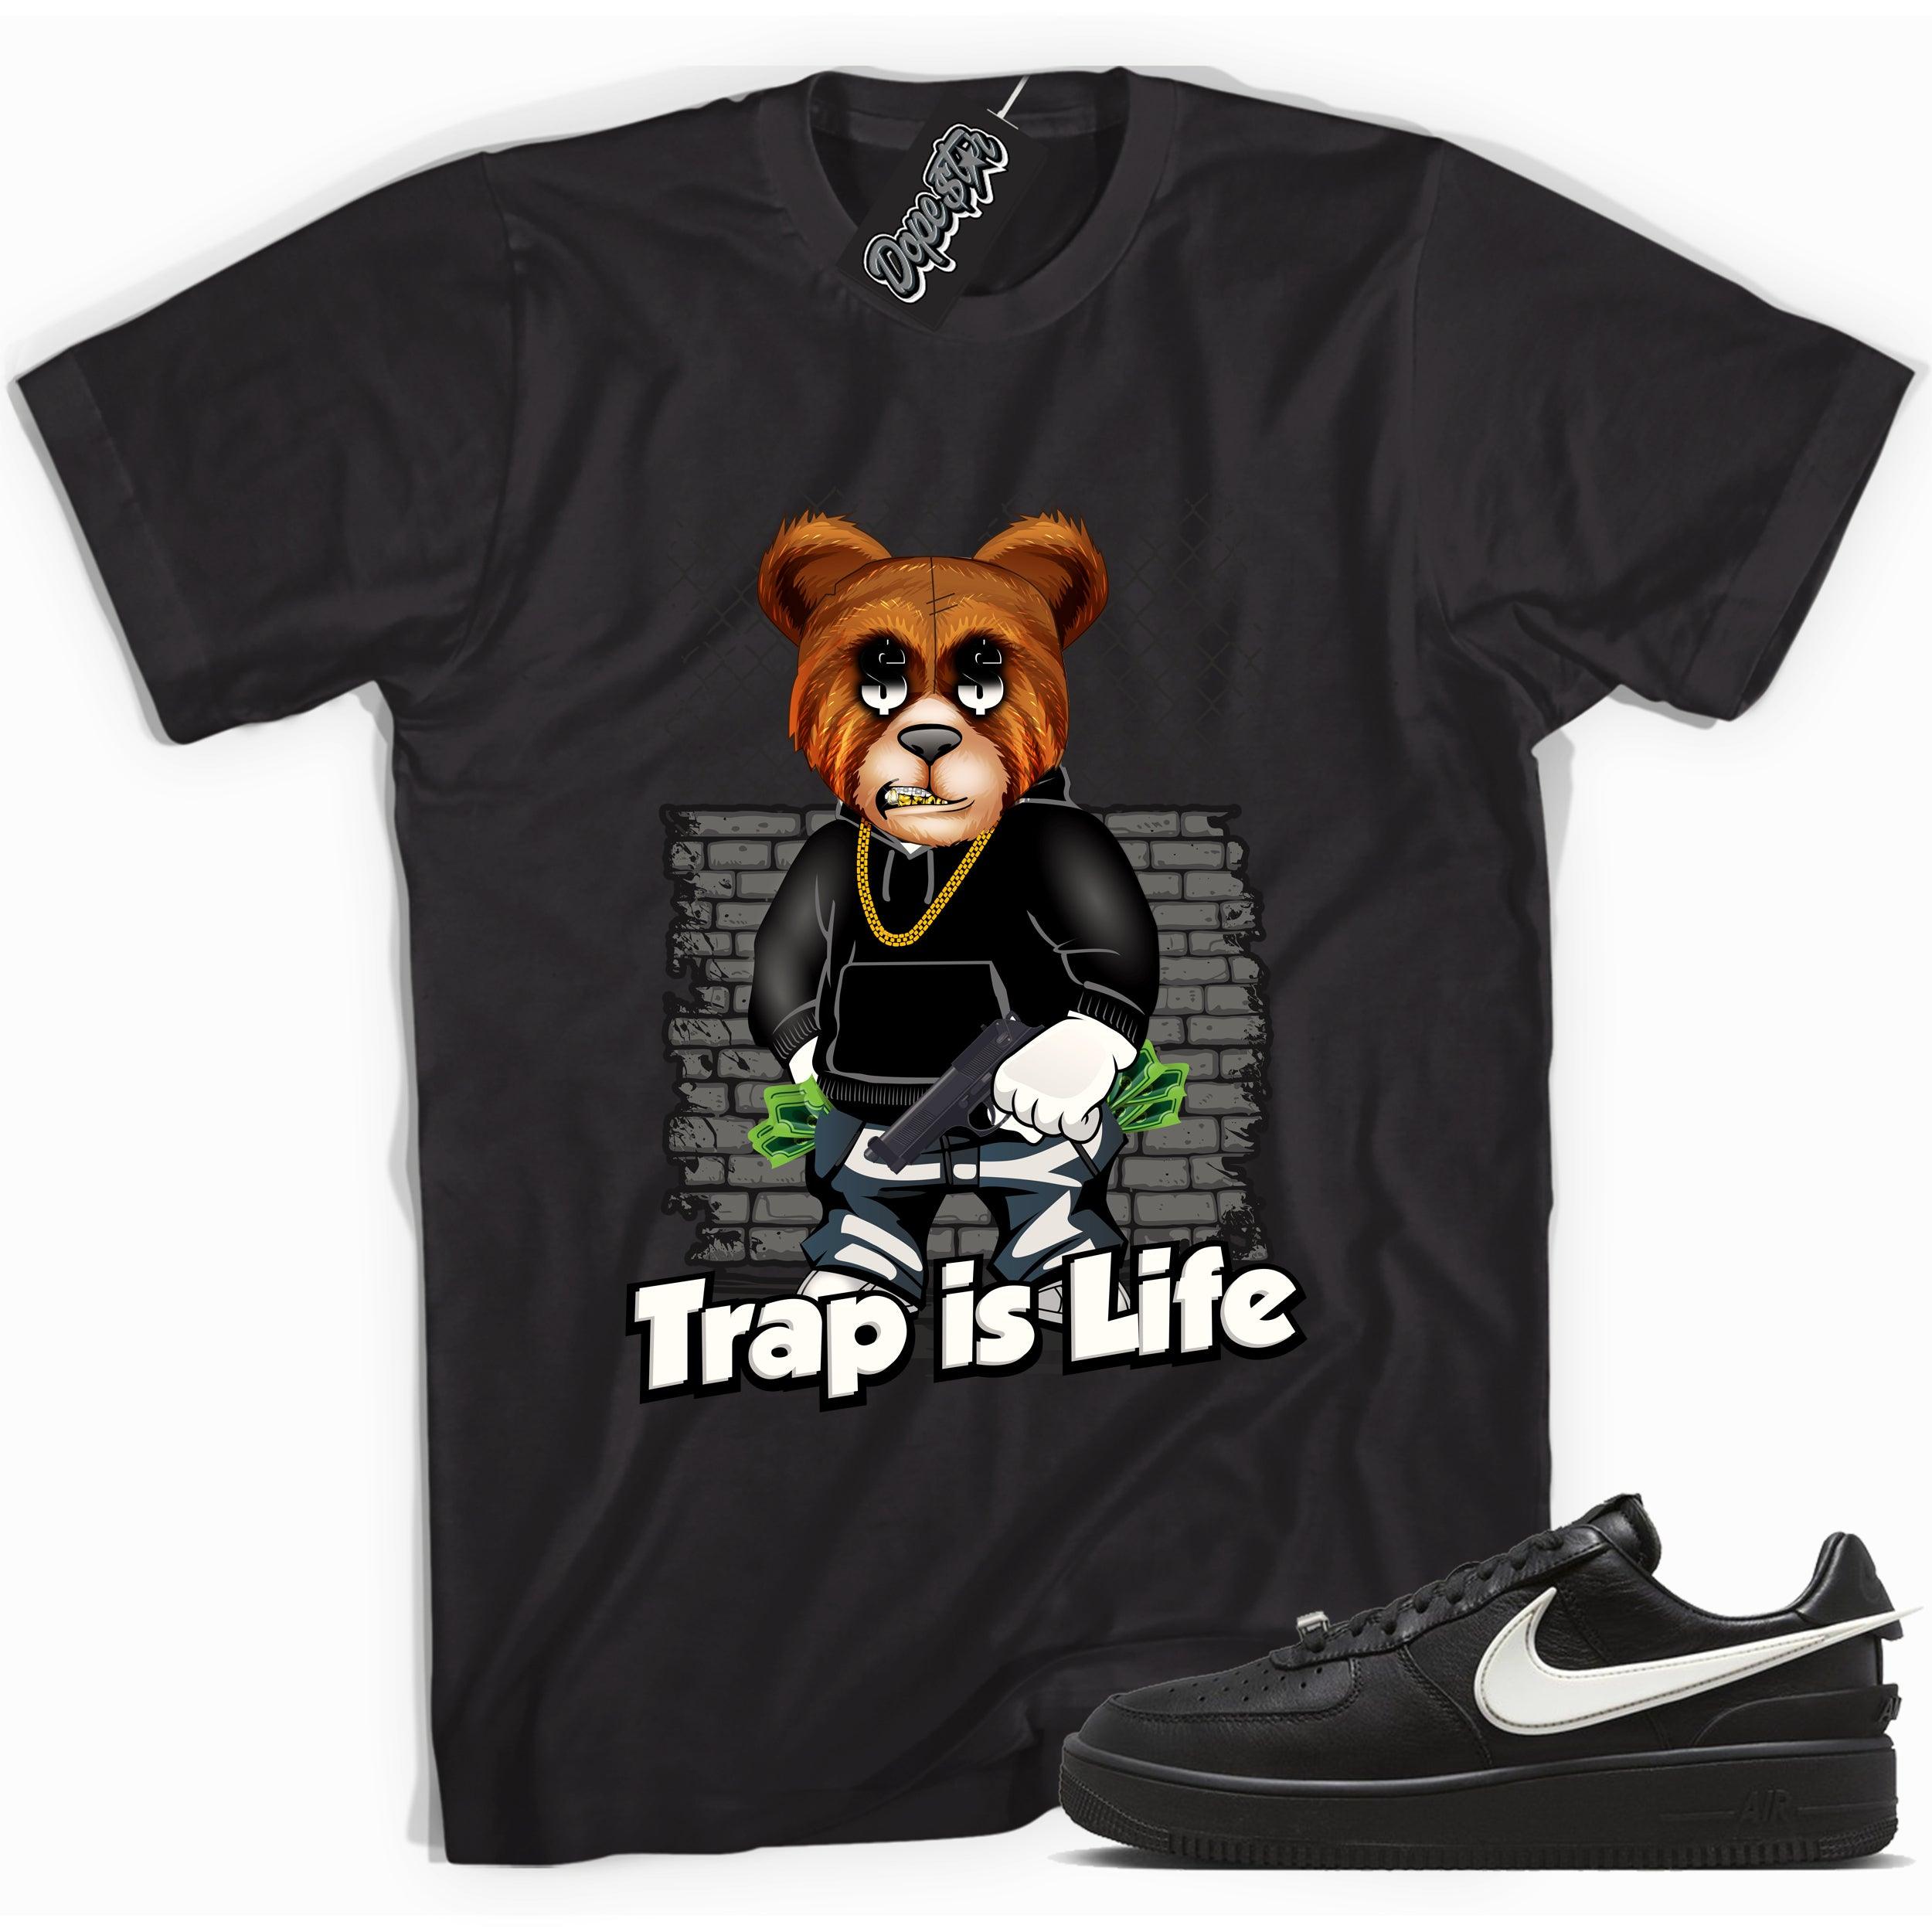 Cool black graphic tee with 'trap is life' print, that perfectly matches Nike Air Force 1 Low Ambush Phantom Black sneakers